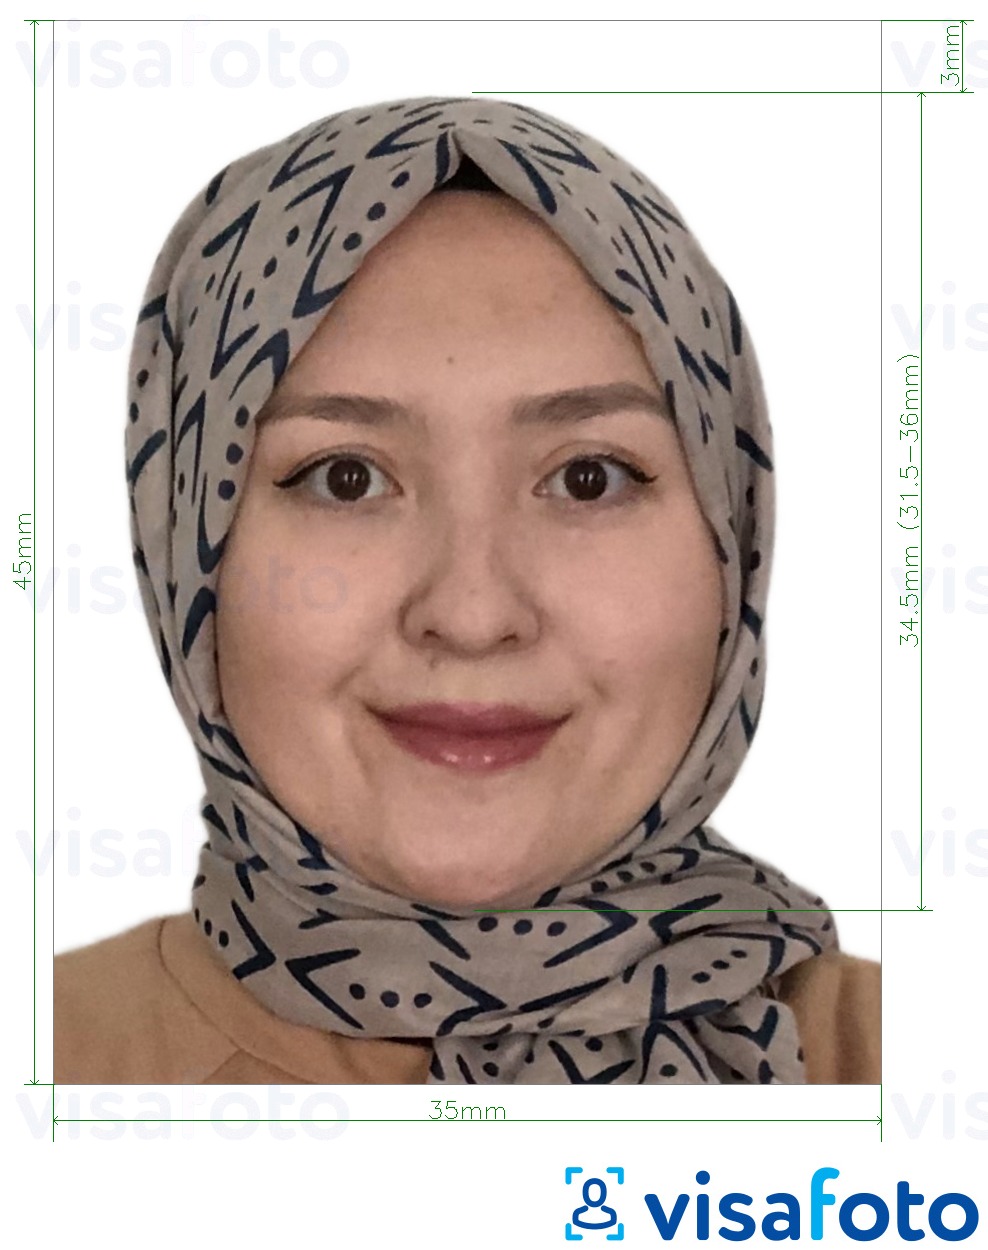 Example of photo for Afghanistan visa 35x45 mm (3.5x4.5 cm) with exact size specification